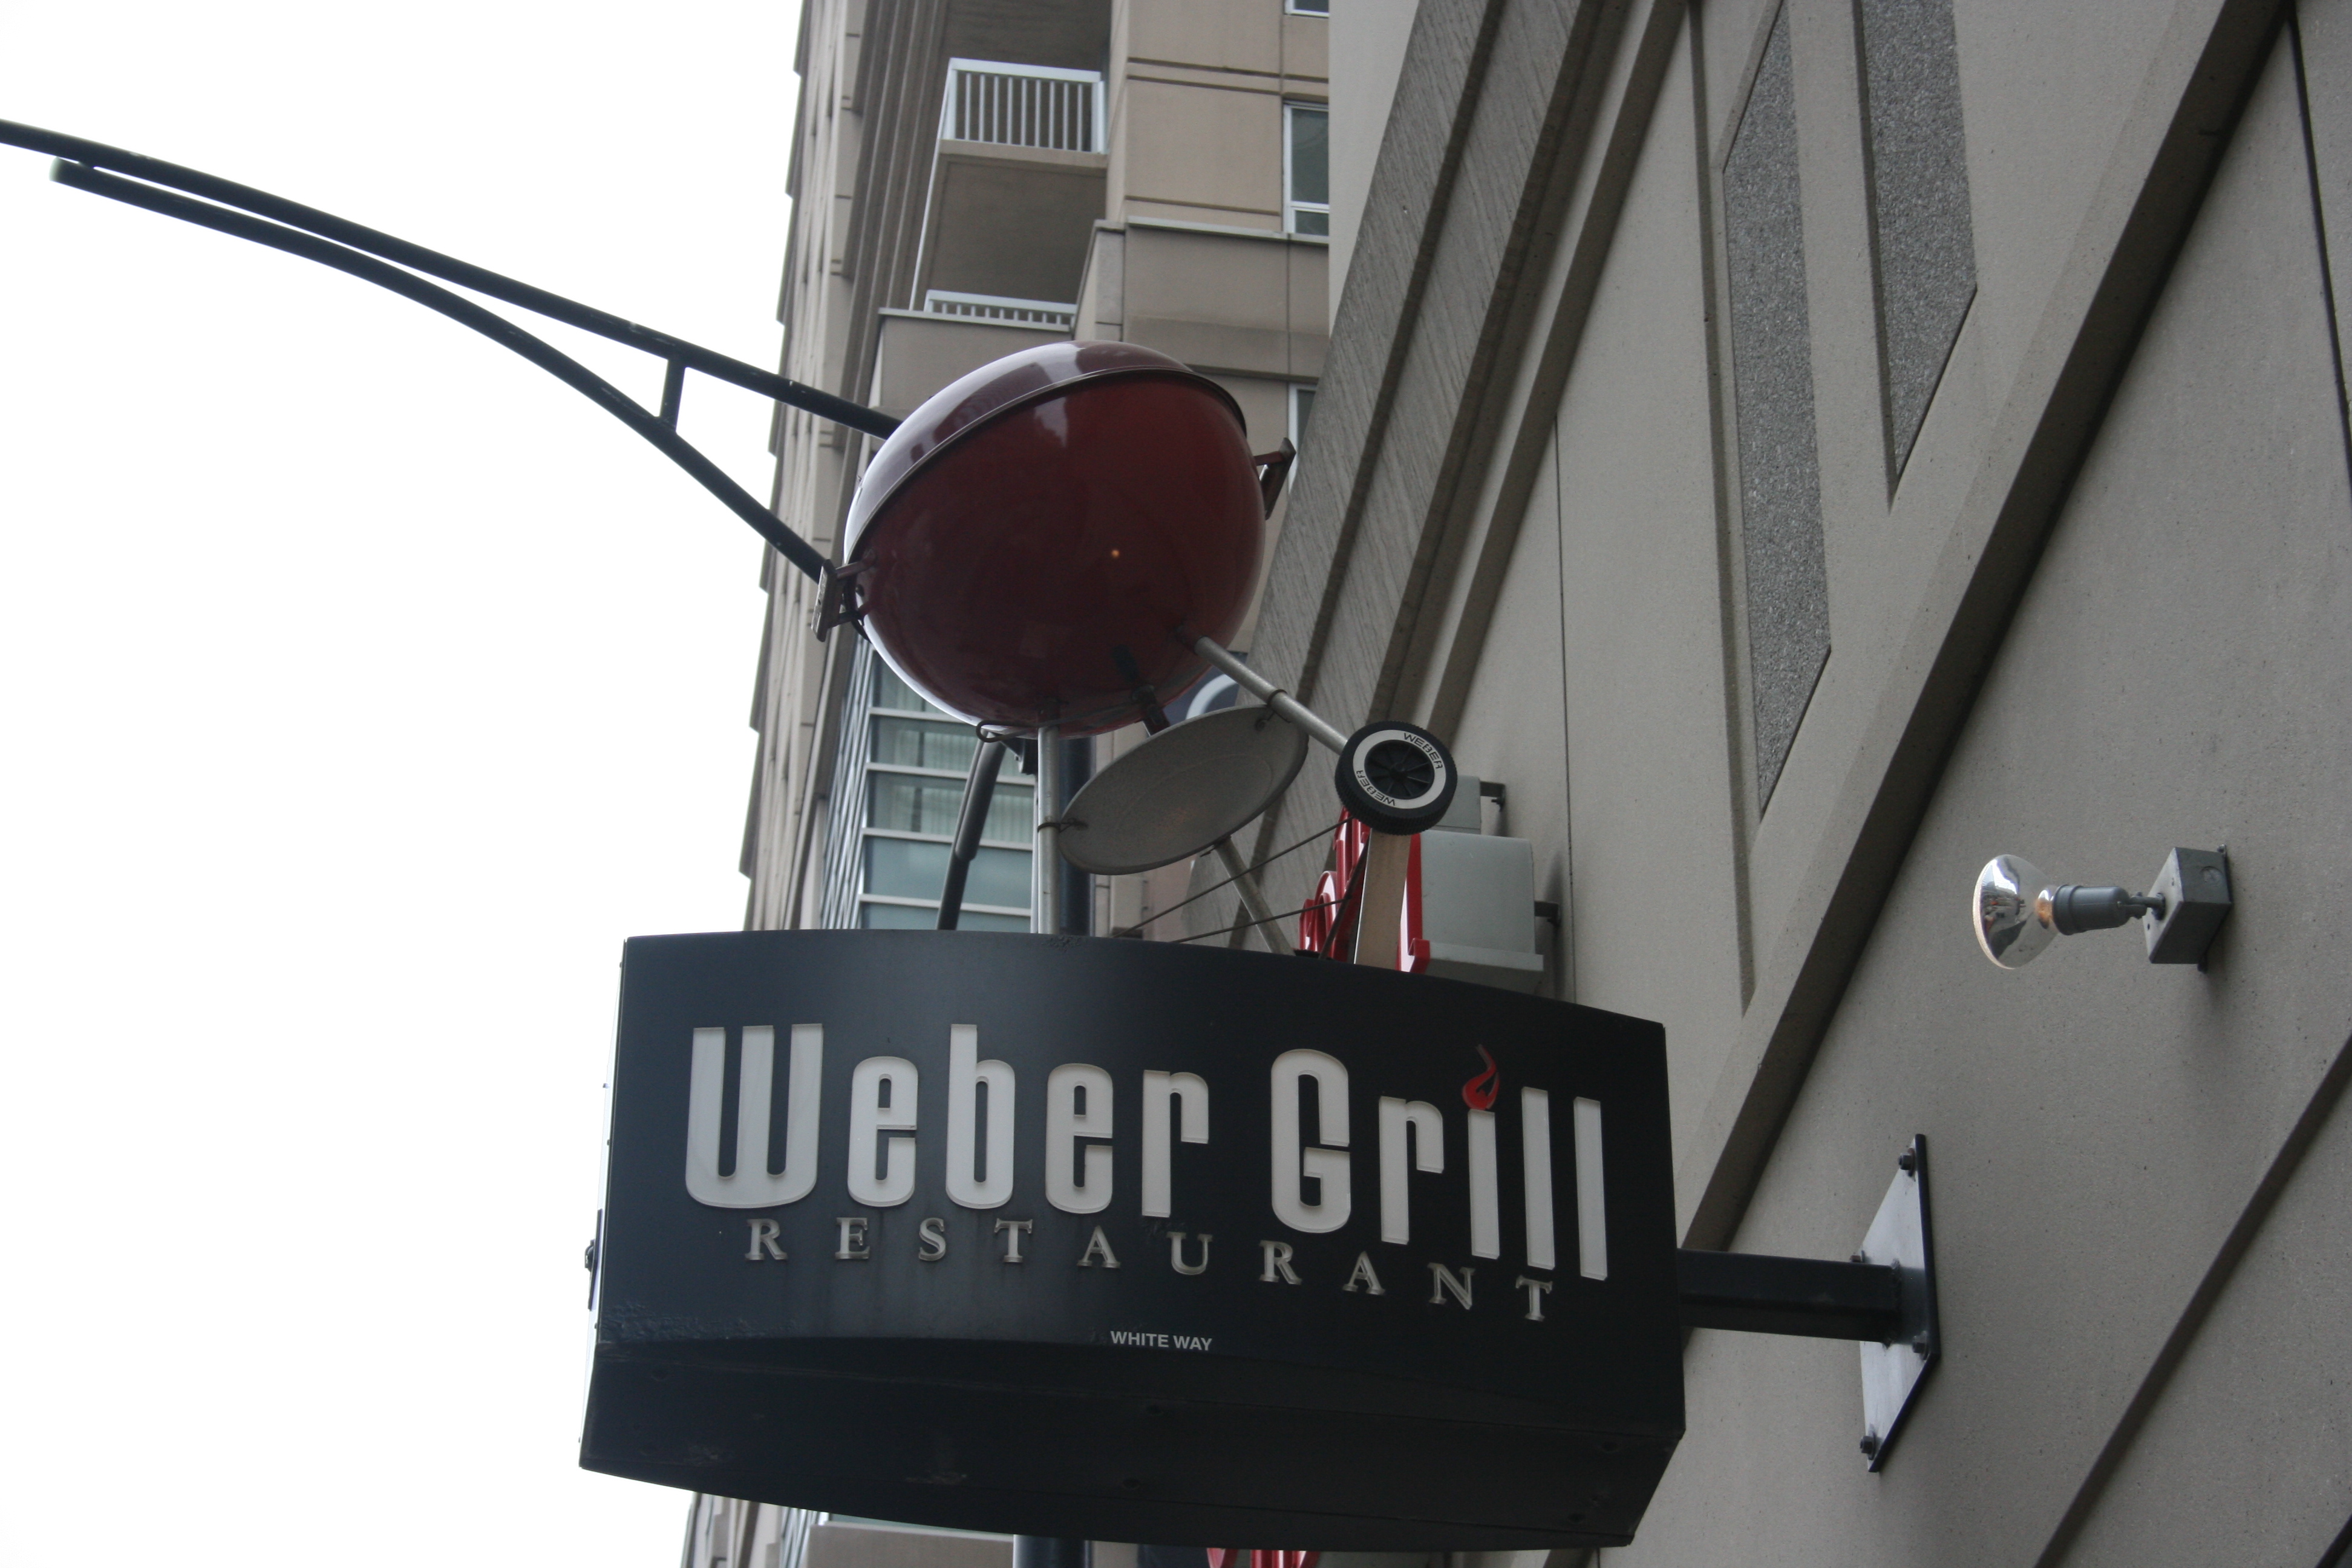 Weber Grill Academy Hosts Cooking Classes For Experts And Novices Alike Clayton Times - becoming phill como tener robux gratis real